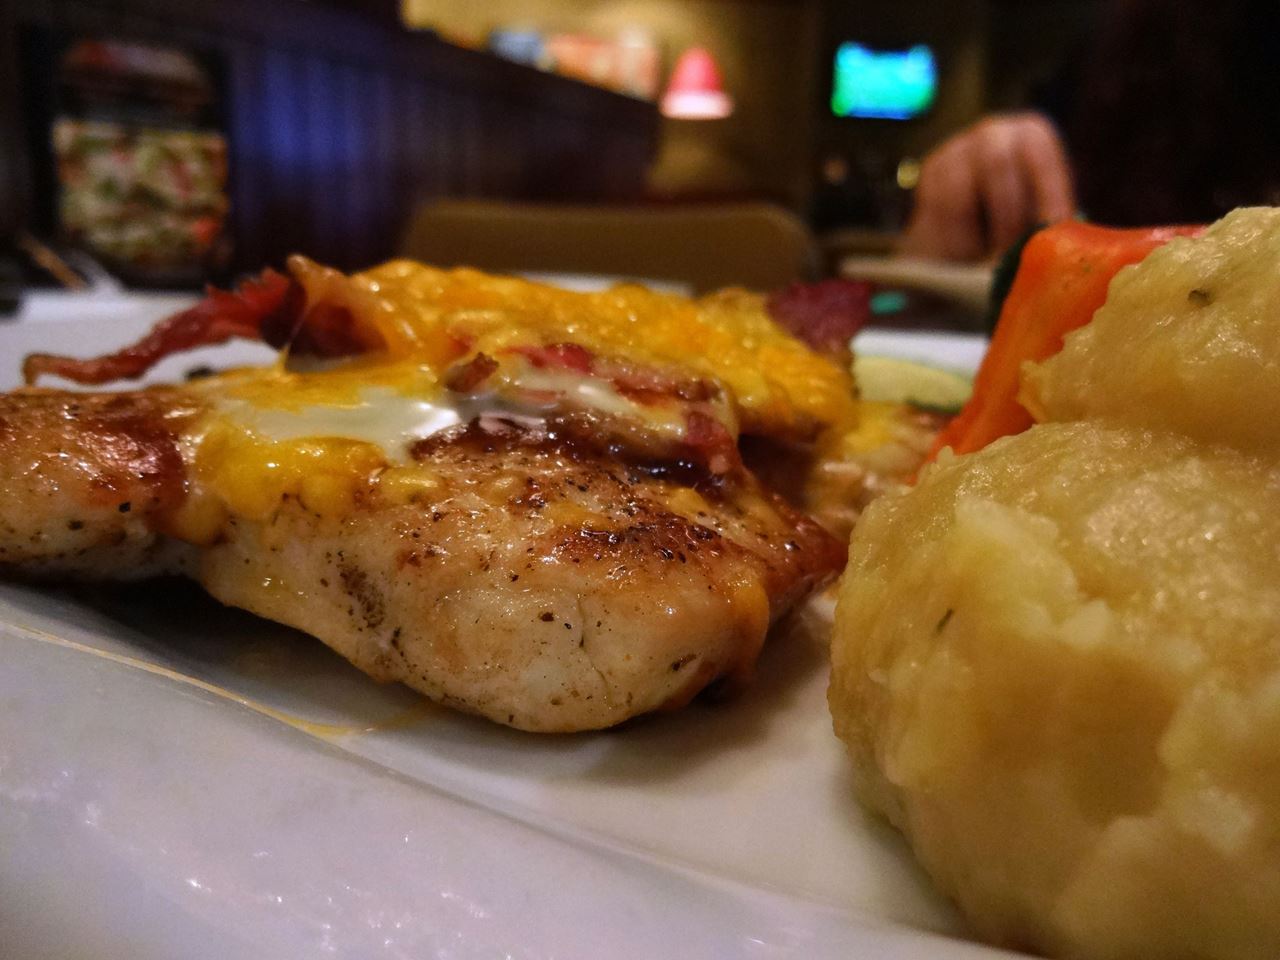 Dinner at Ruby Tuesday 360 Mall Branch and Gulf Branch